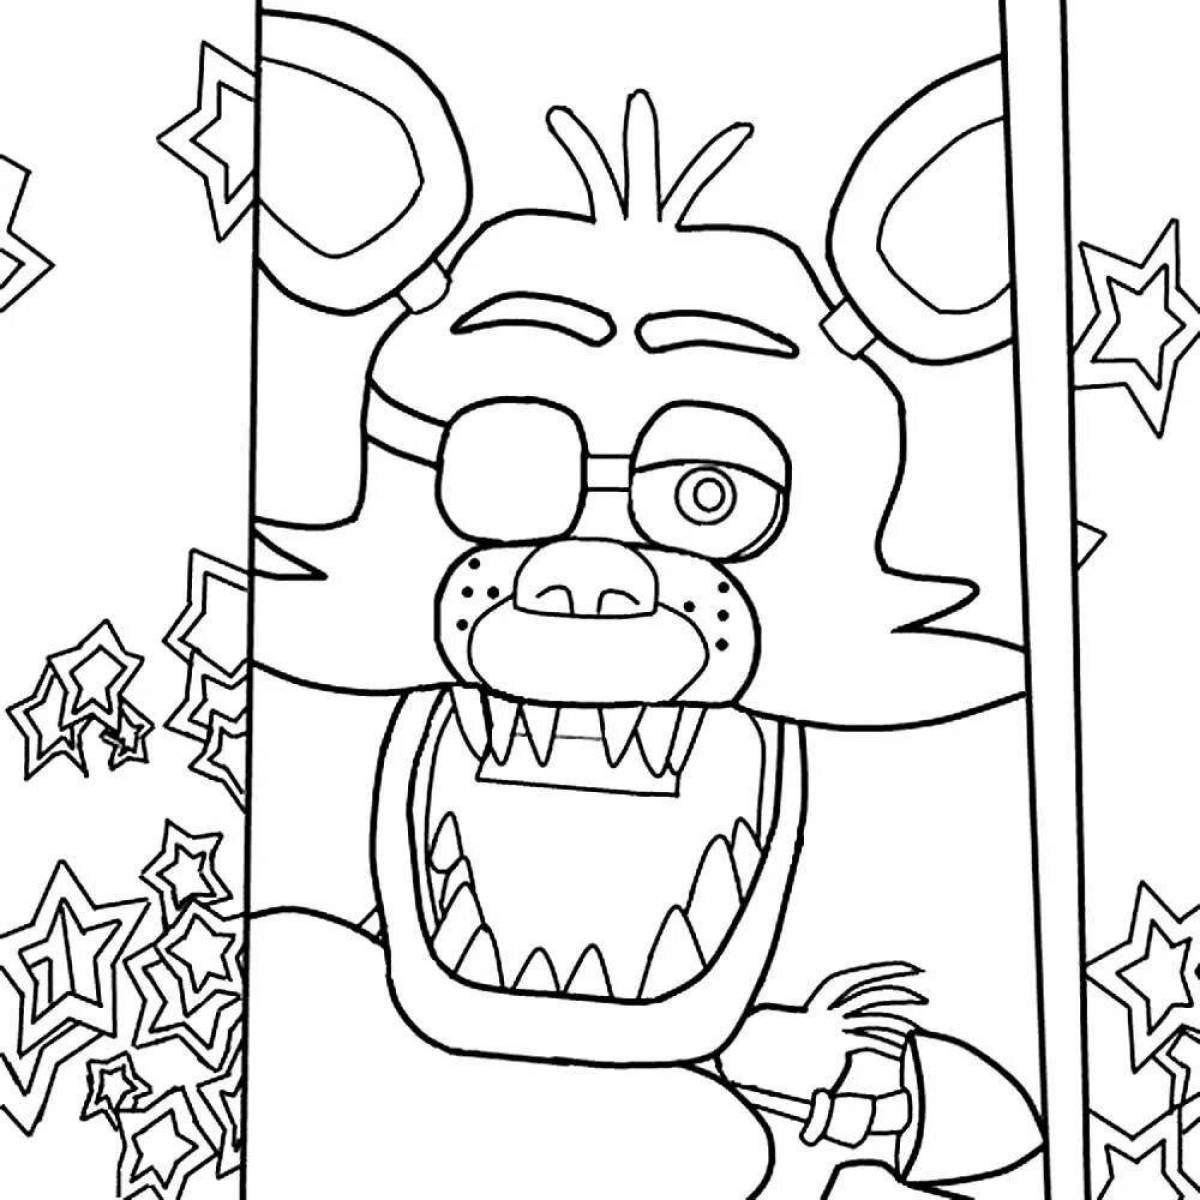 Fantastic freddy coloring book for kids